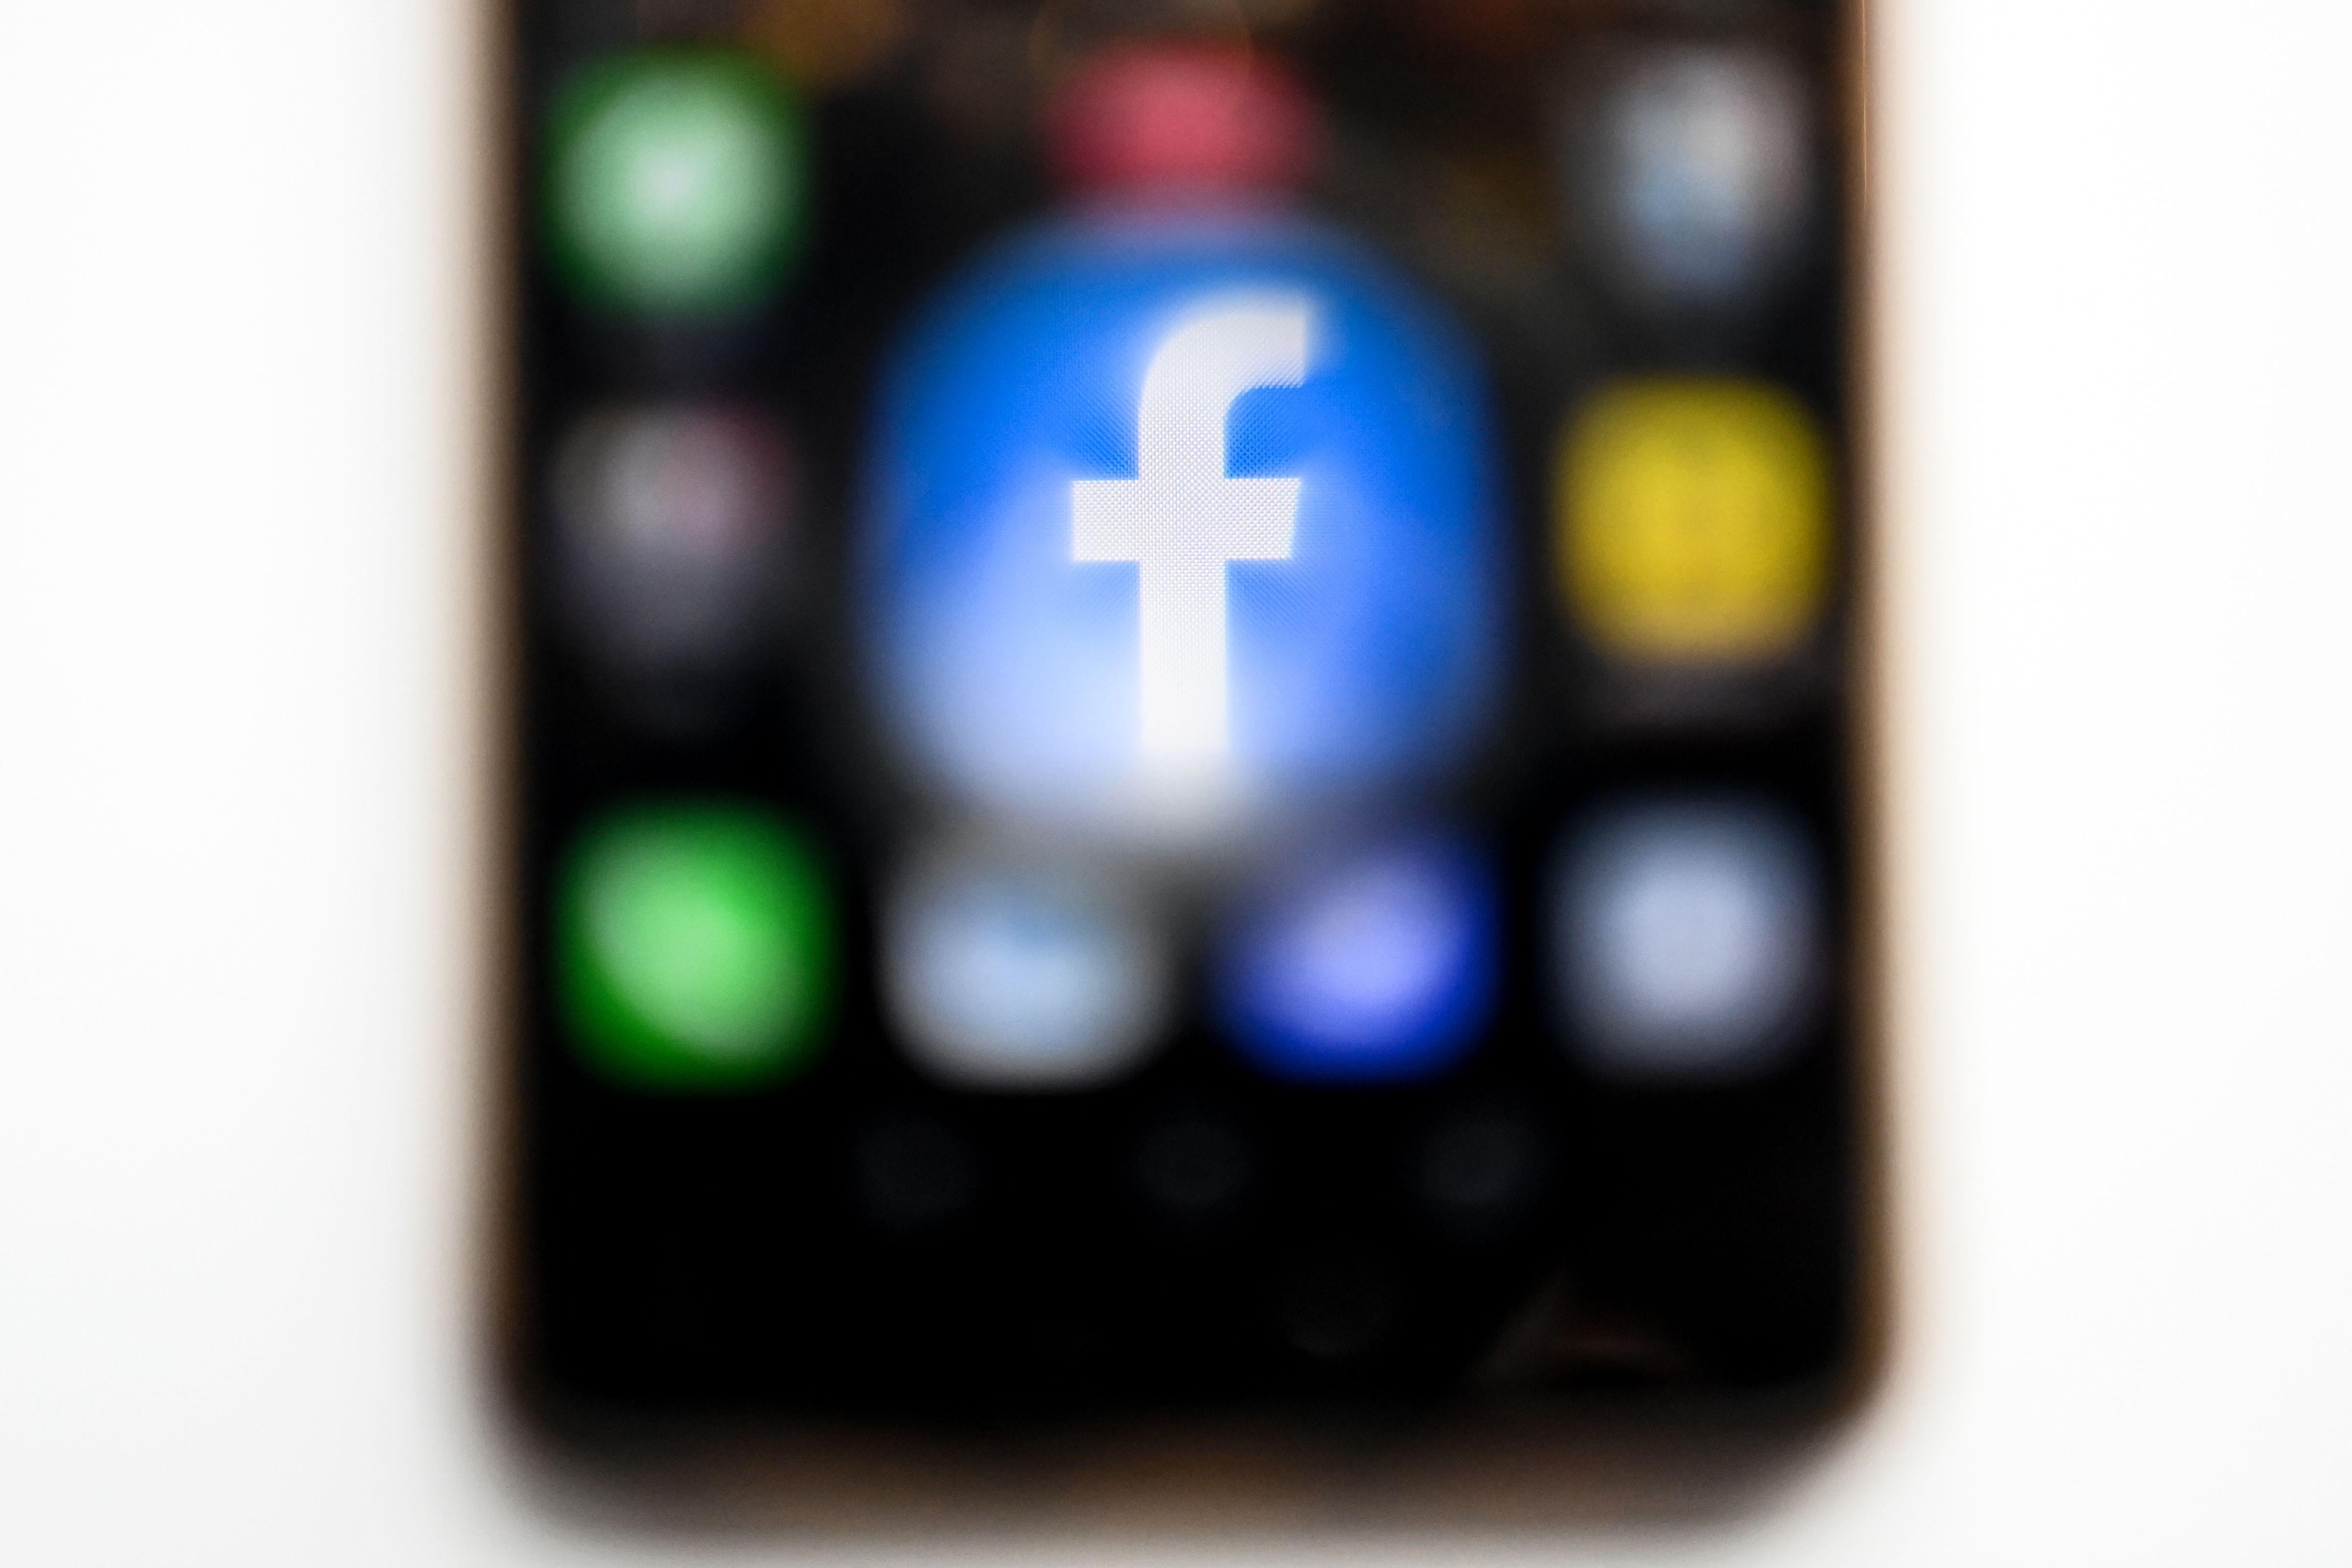 A blurry image of a smartphone home screen, with a large Facebook icon.